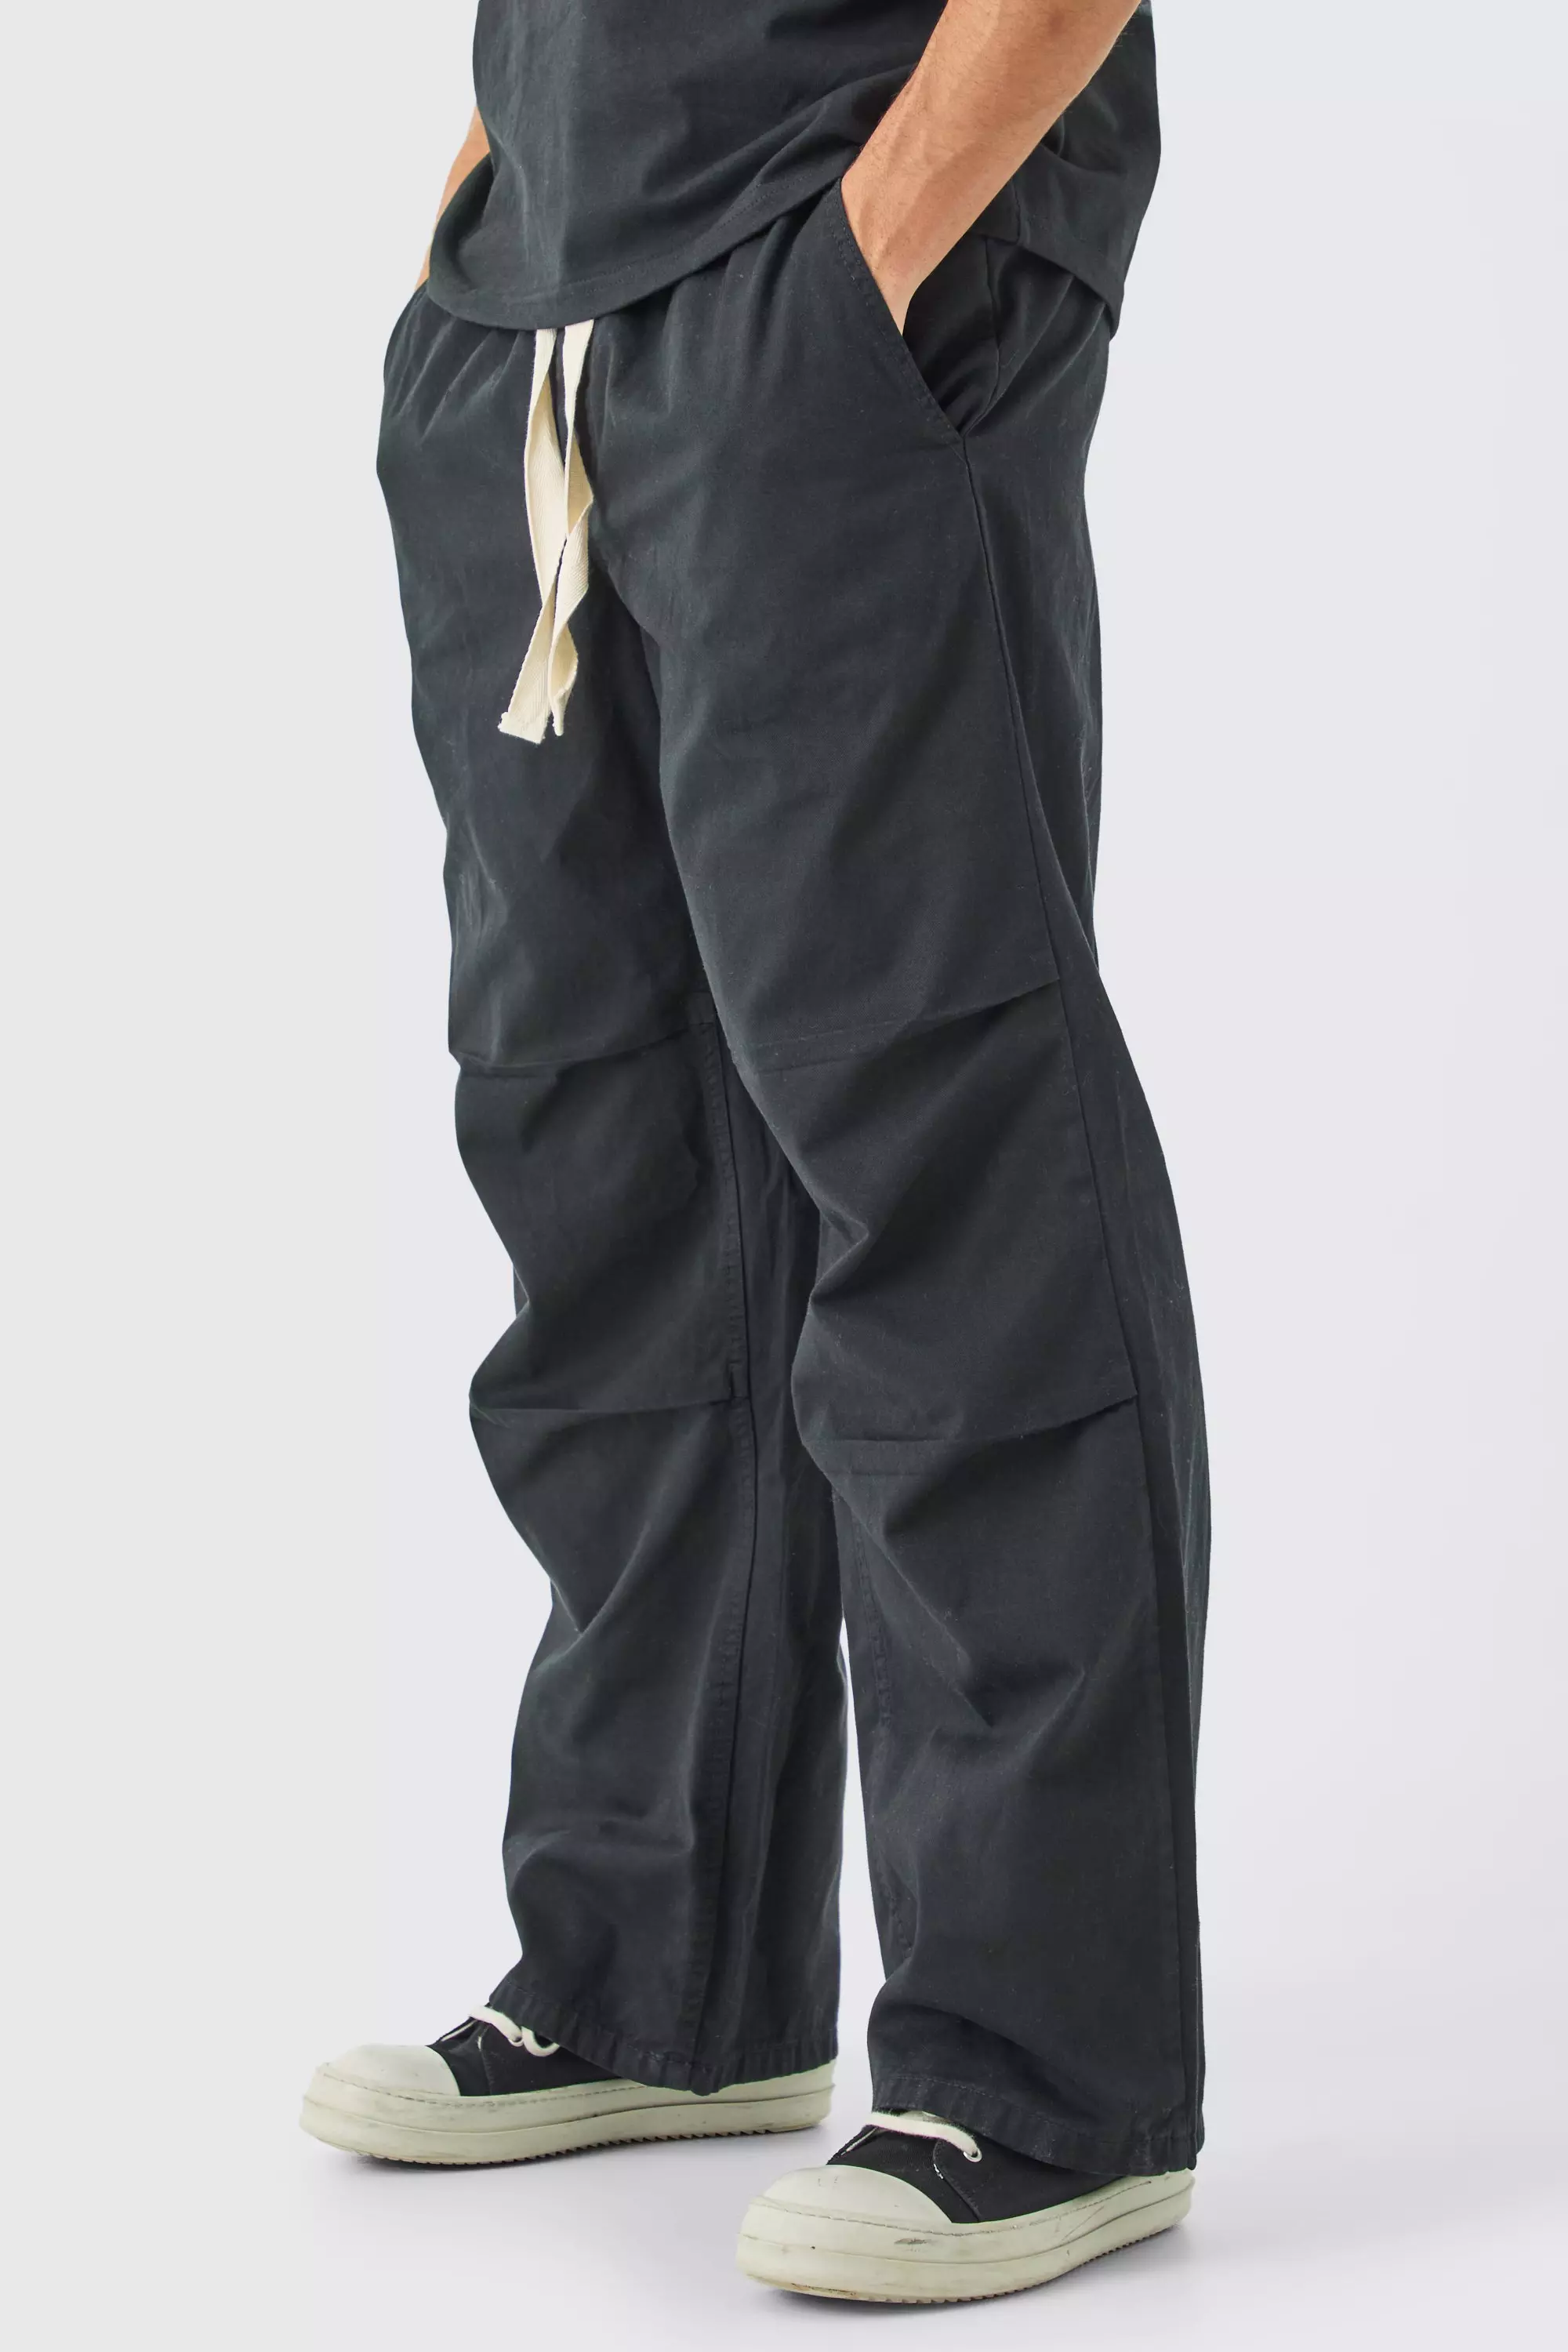 Elastic Waist Contrast Drawcord Extreme Baggy Trouser Charcoal